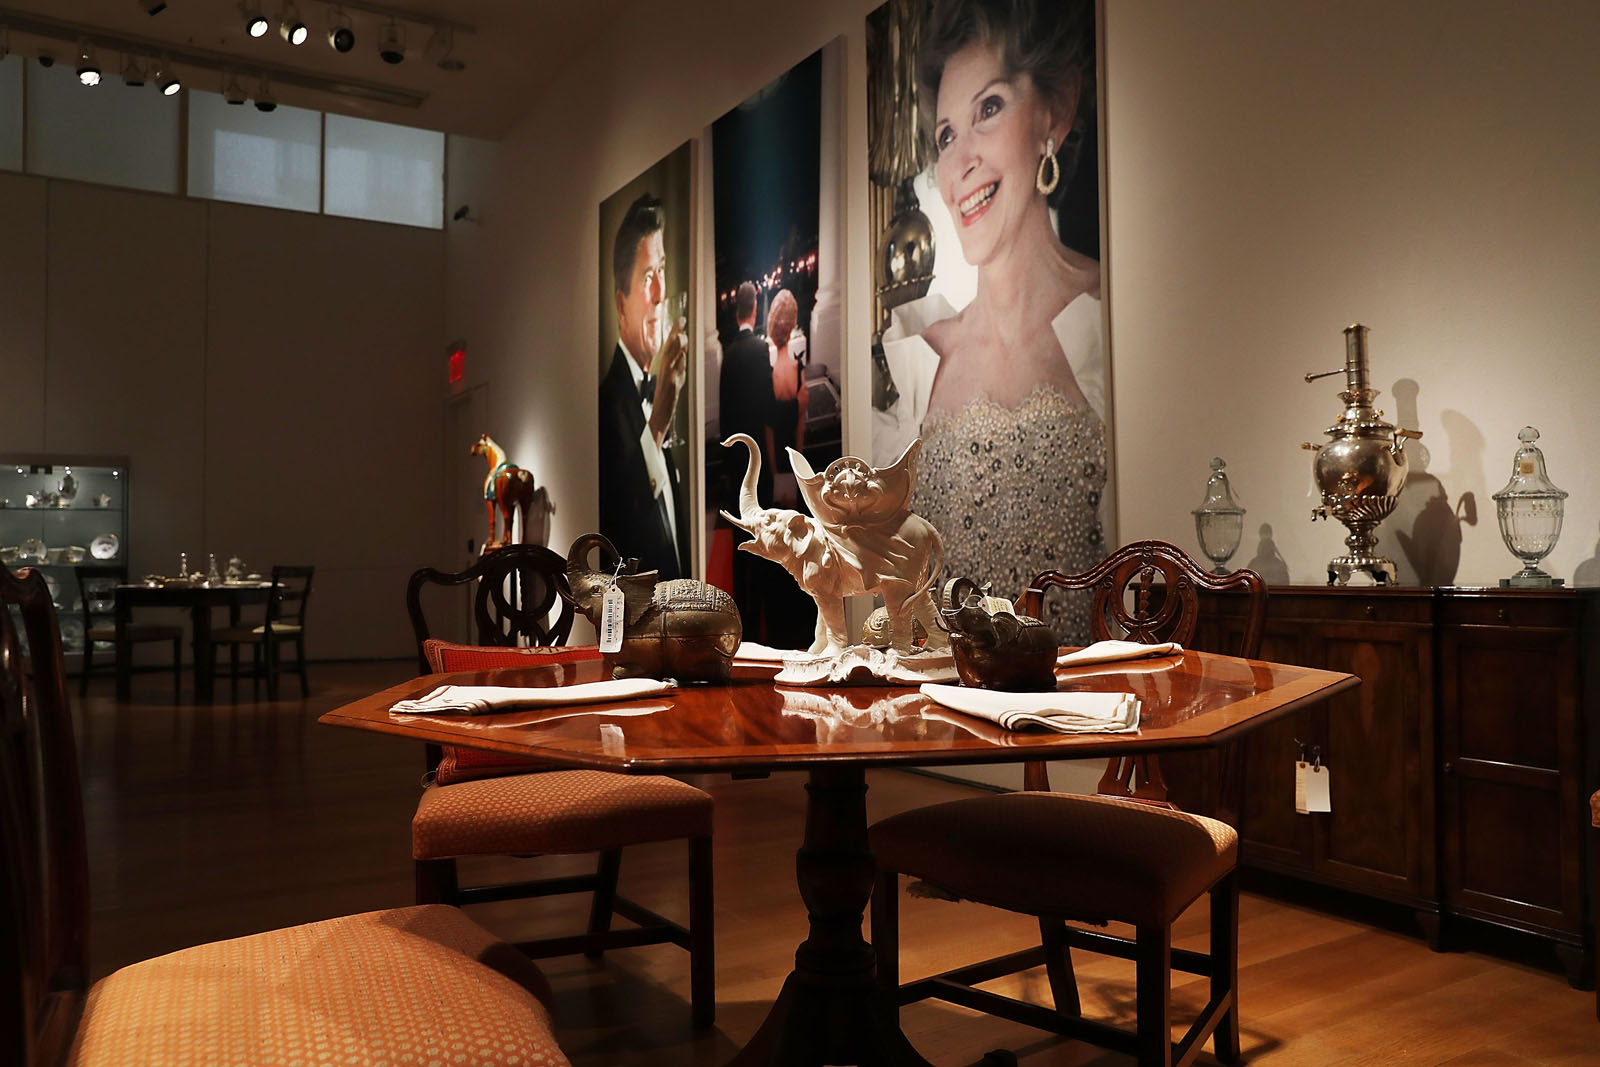 NEW YORK, NY - SEPTEMBER 16:  Furniture and other items are displayed at Christie's where items from the former president and Nancy Reagan's California home are to be auctioned shortly on September 16, 2016 in New York City. Many personal items of the first couple are to be auctioned including "Hollywood Regency"style furniture and light fixtures, decorative works, handbags, porcelain stamped with the presidential seal, jewelry and a pair of Reagan's cowboy boots with the presidential seal. The e-catalog auction, which is expected to generate more than $2 million with individual items ranging from $1,000 to $50,000, goes live at Christie's Monday in New York. Proceeds from the auction will be donated to the Ronald Reagan Presidential Foundation and Institute.  (Photo by Spencer Platt/Getty Images)